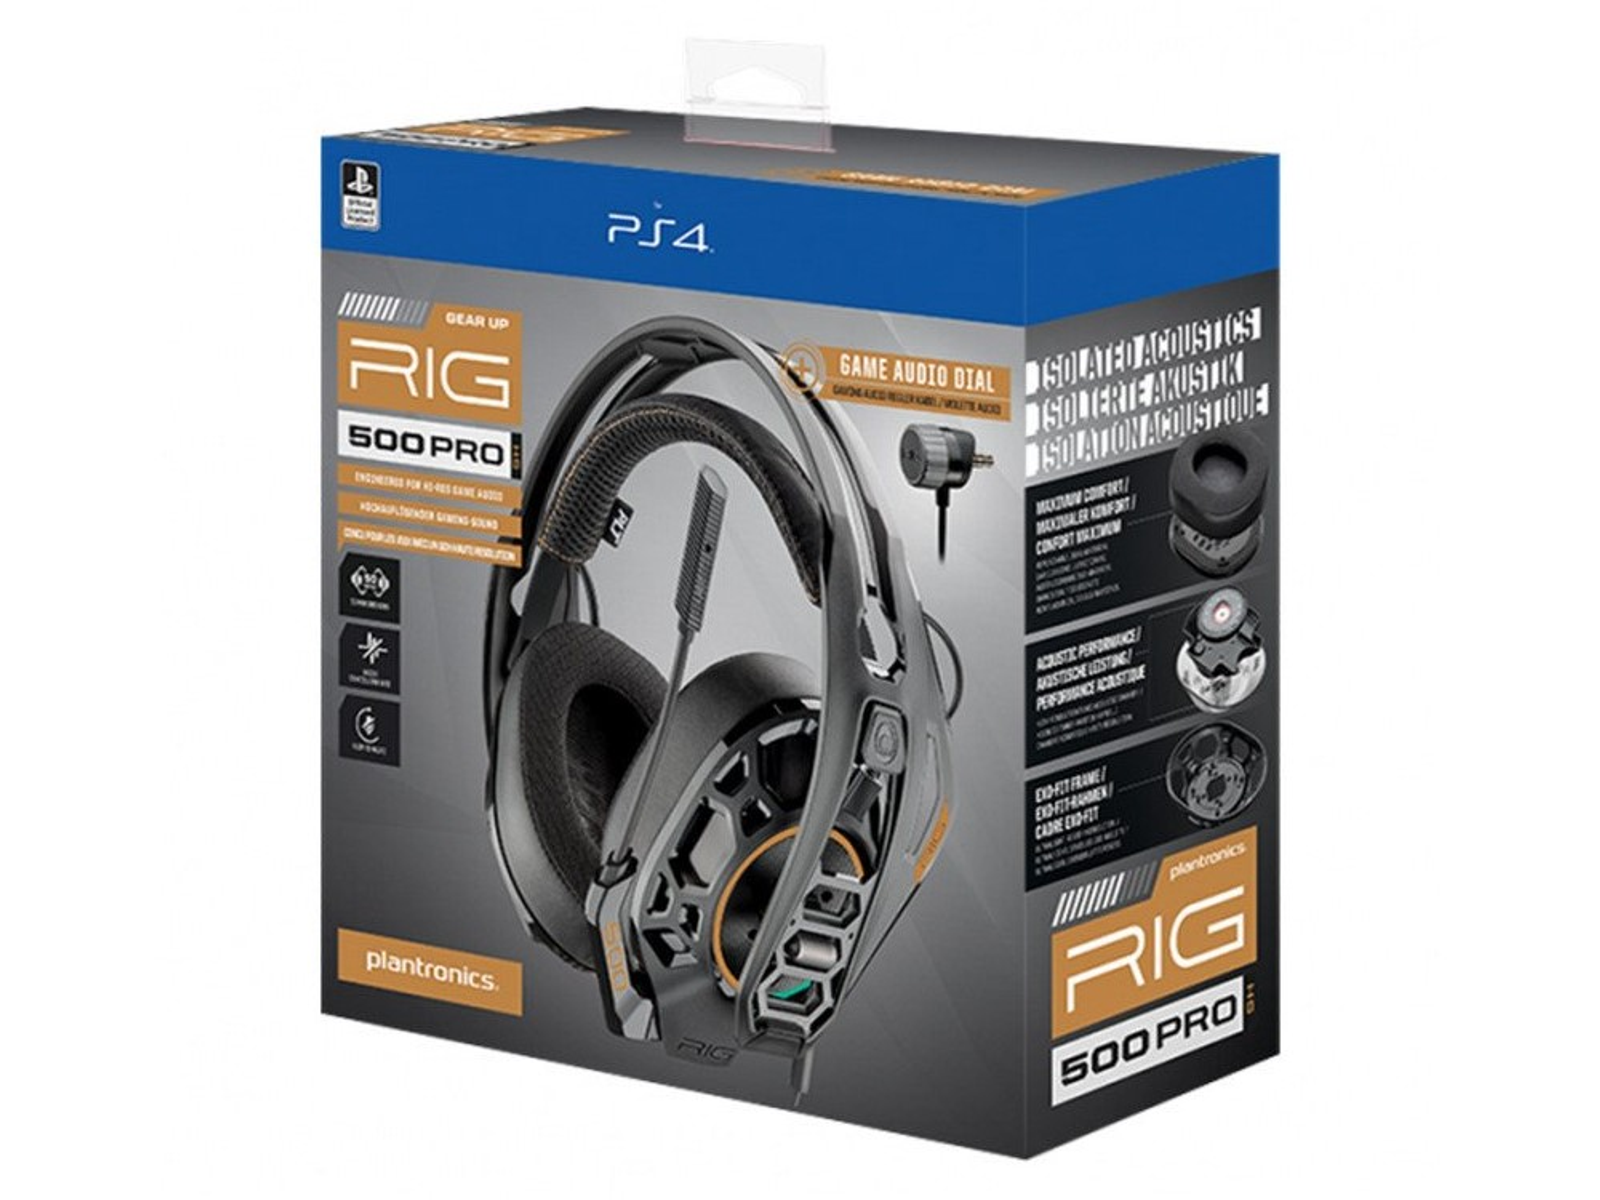 PLANTRONICS RIG 500 Over-ear Gaming PRO schwarz HS, Headset